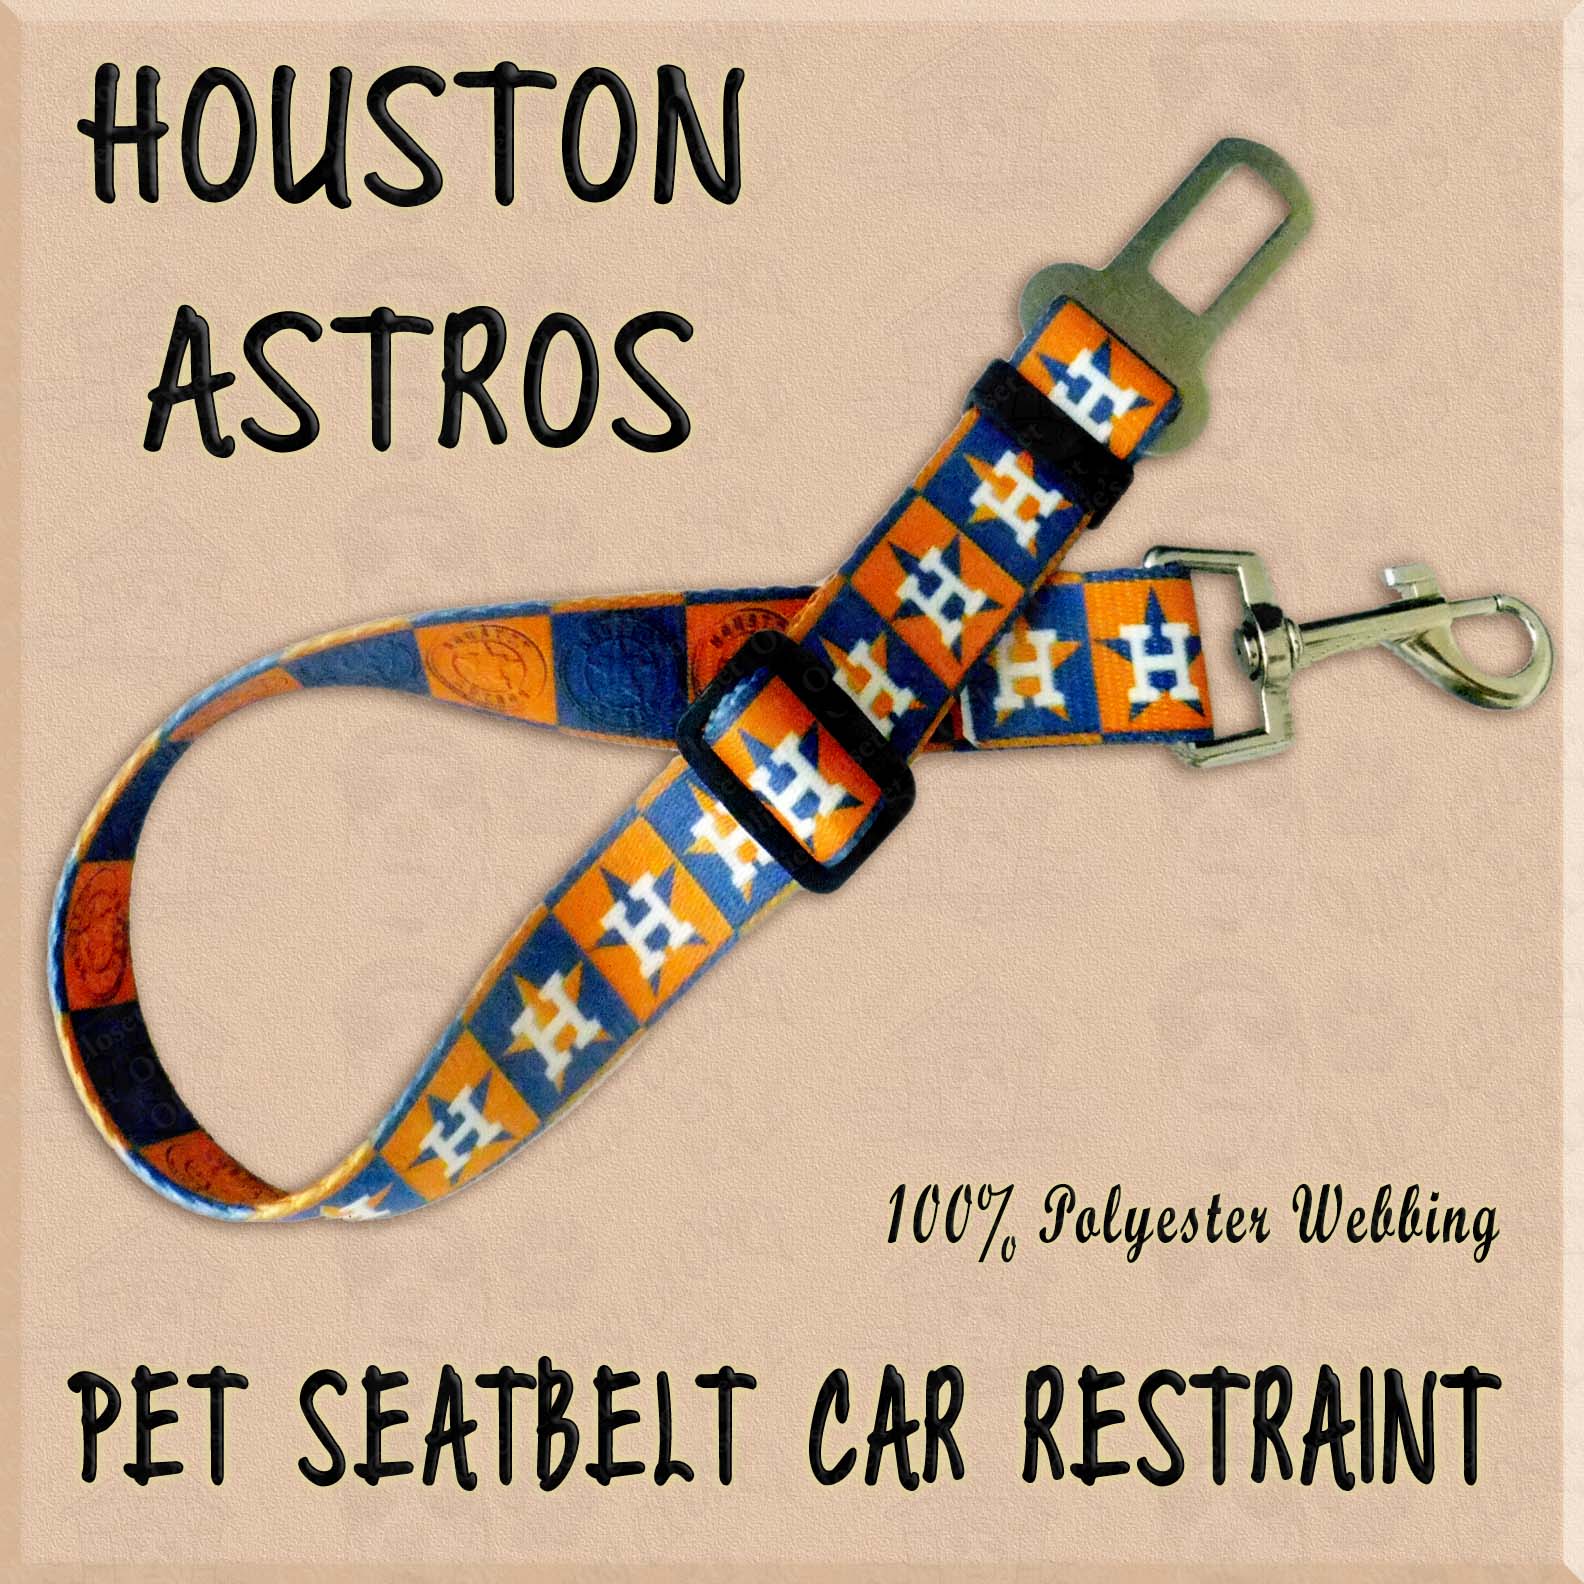 This “Houston Astros” Pet Seat Belt Car Restraint will allow you to travel  safely with your pet.